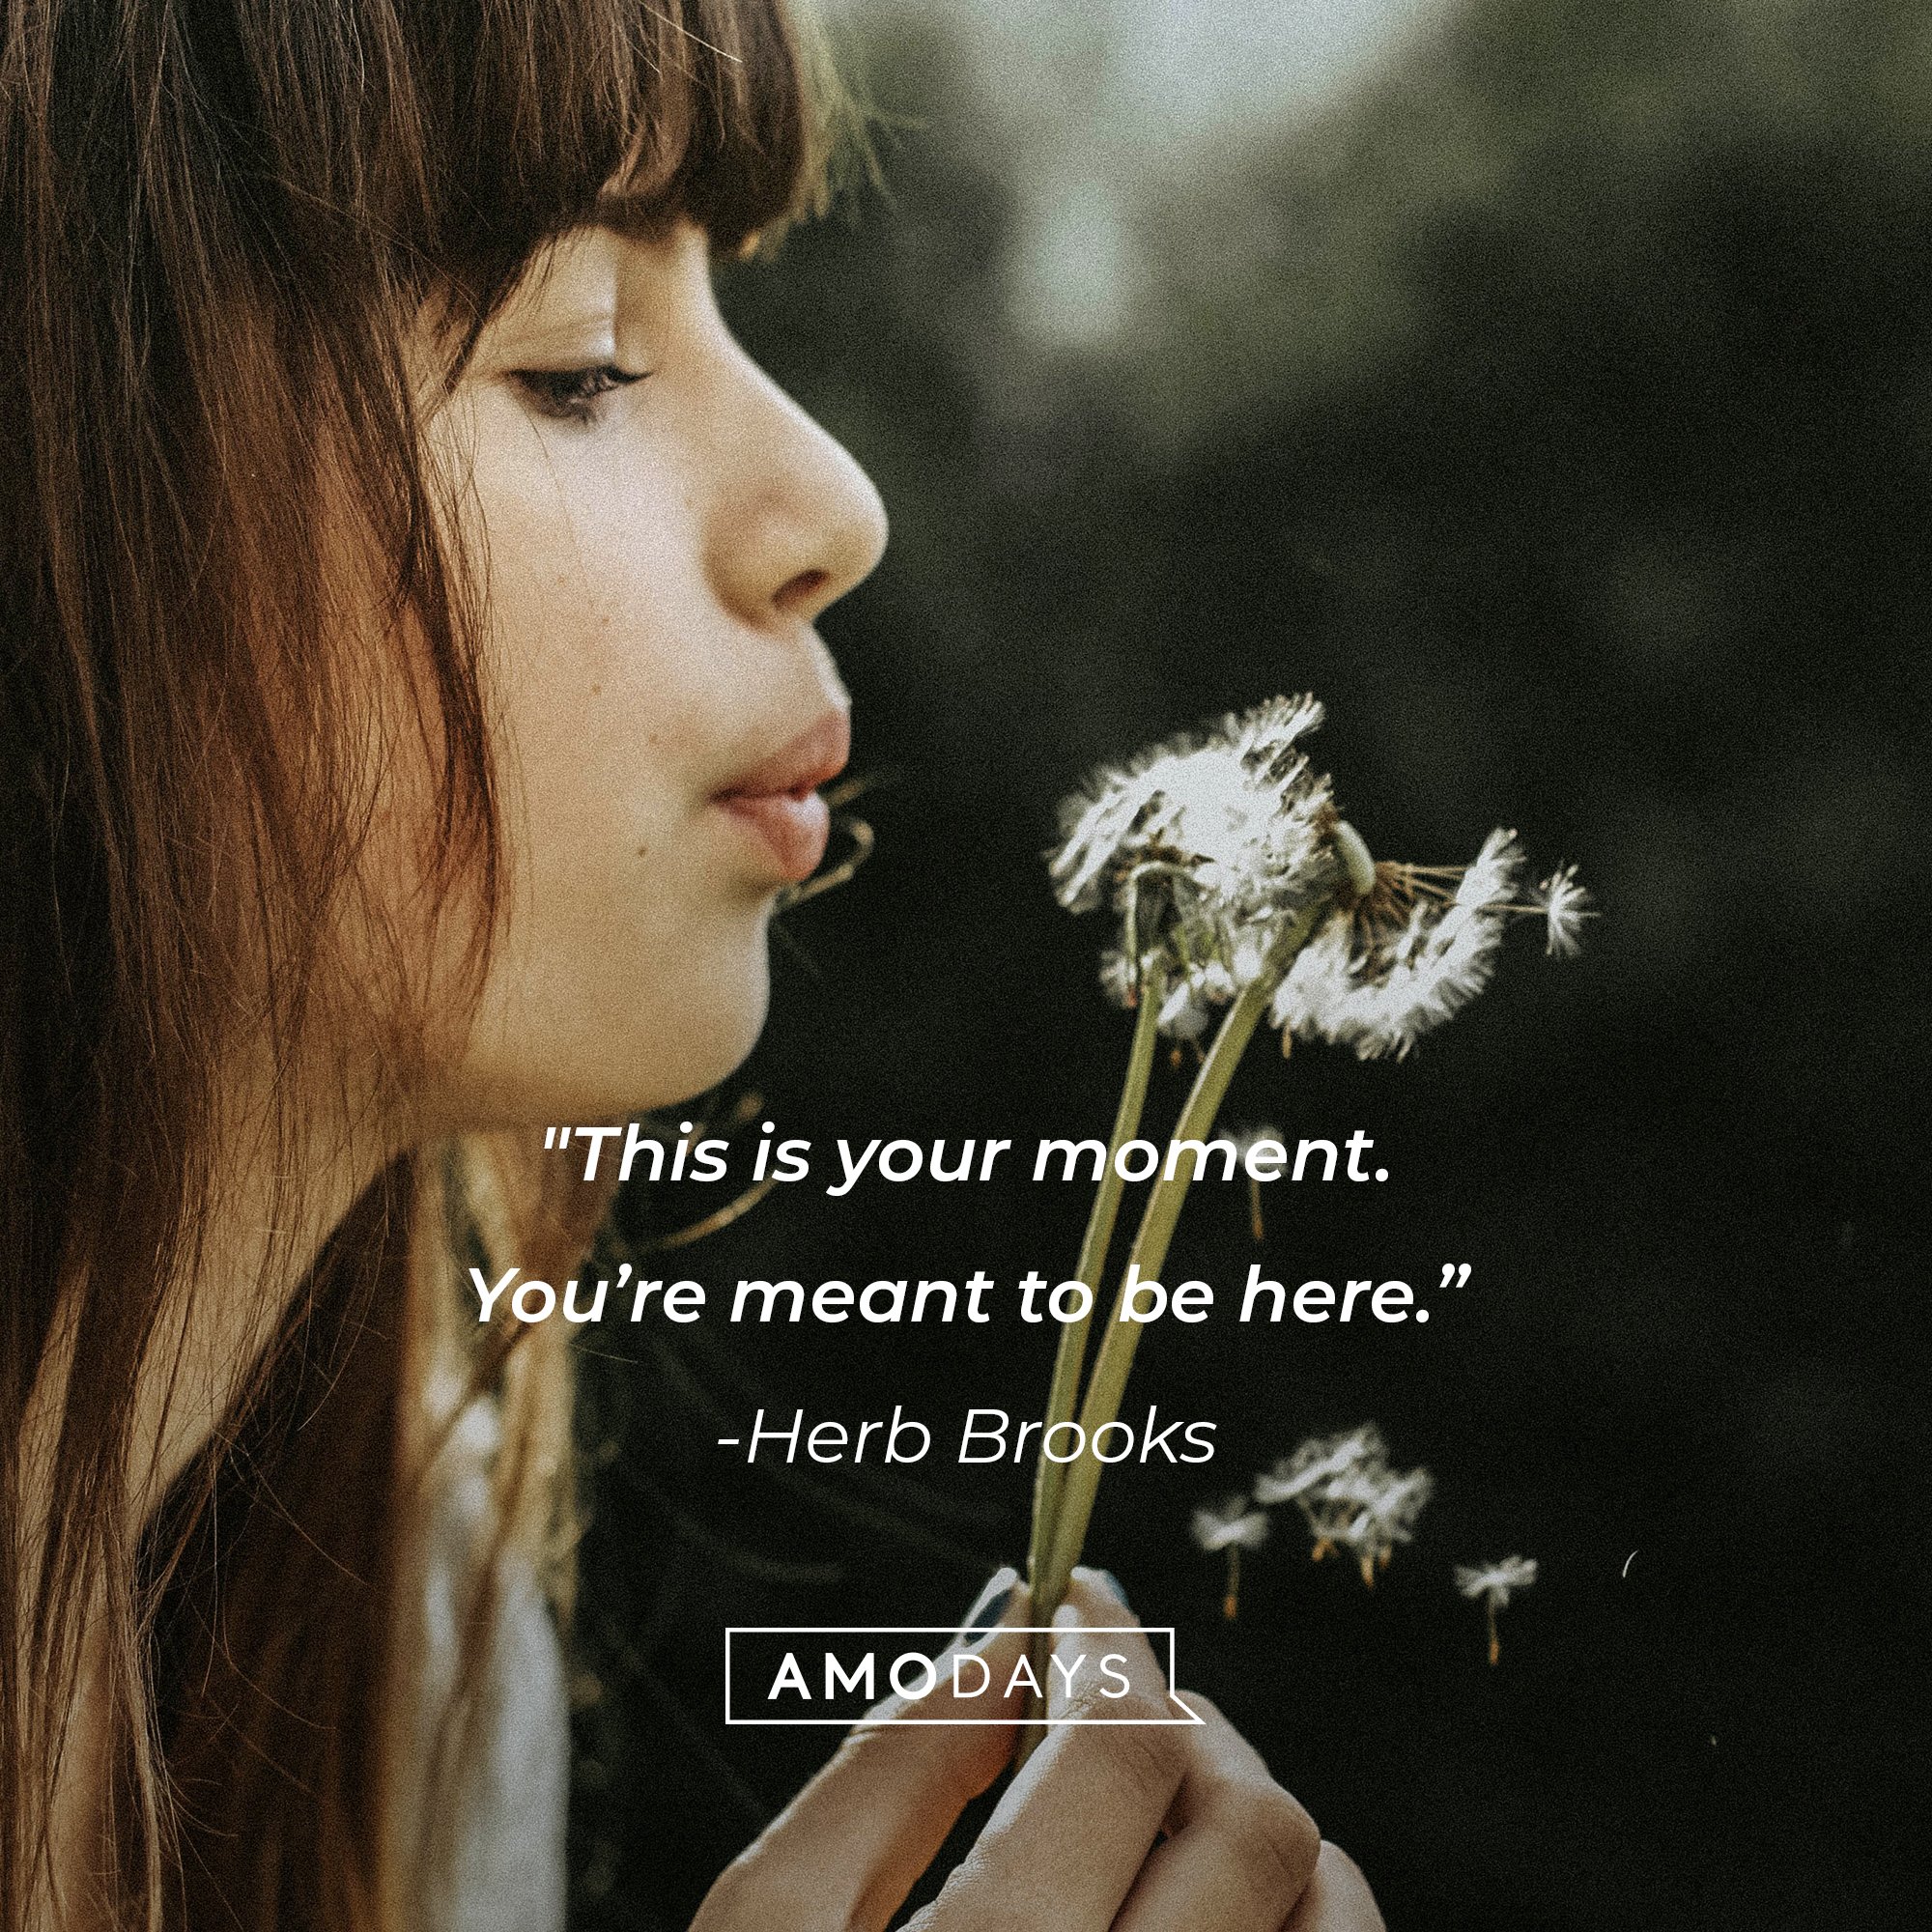 Herb Brooks’ quote: "This is your moment. You’re meant to be here.” | Image: AmoDays